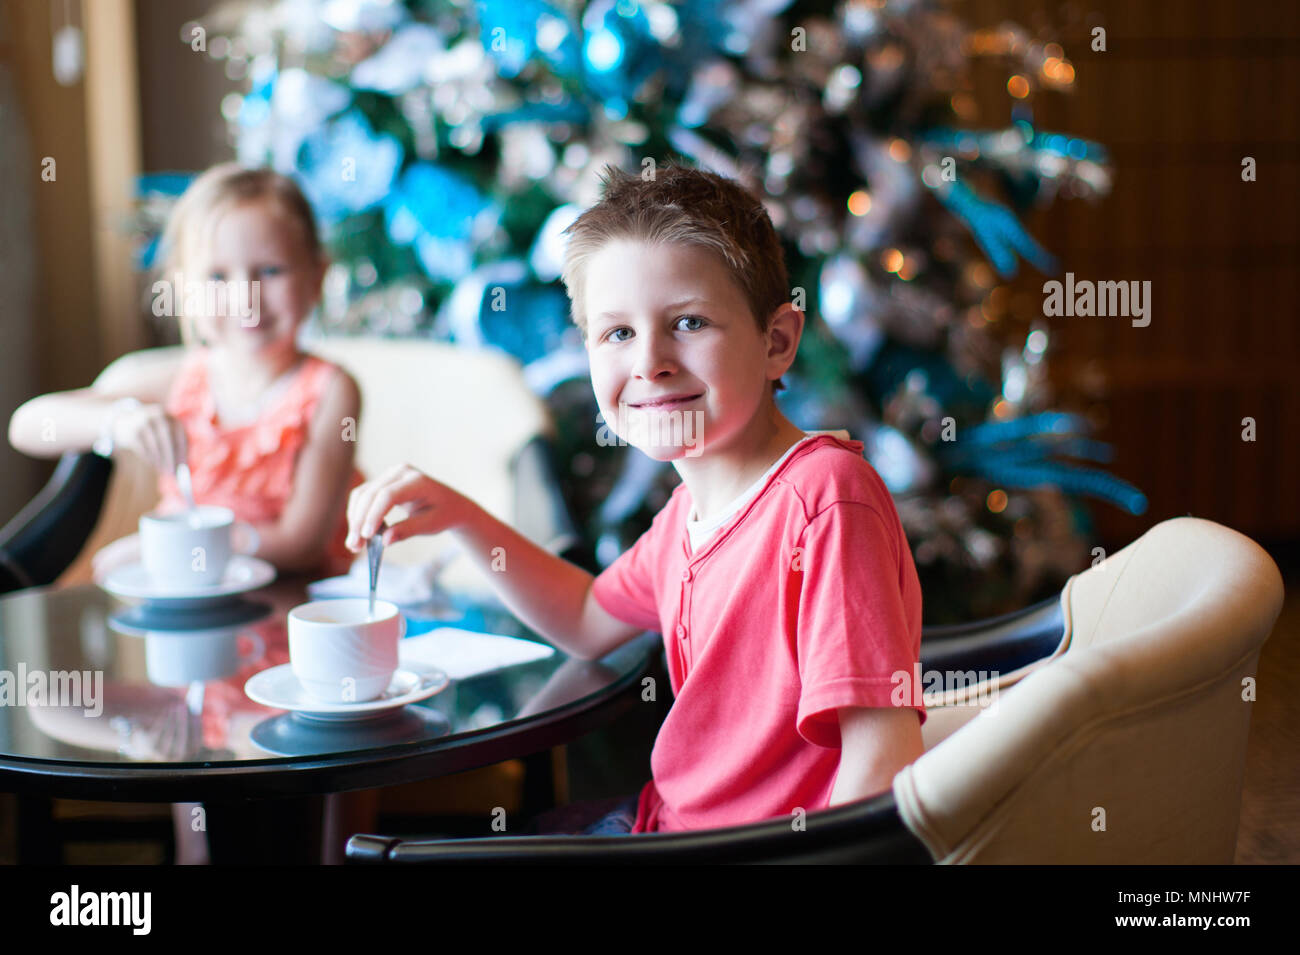 Two children drink tea from white cups Stock Photo